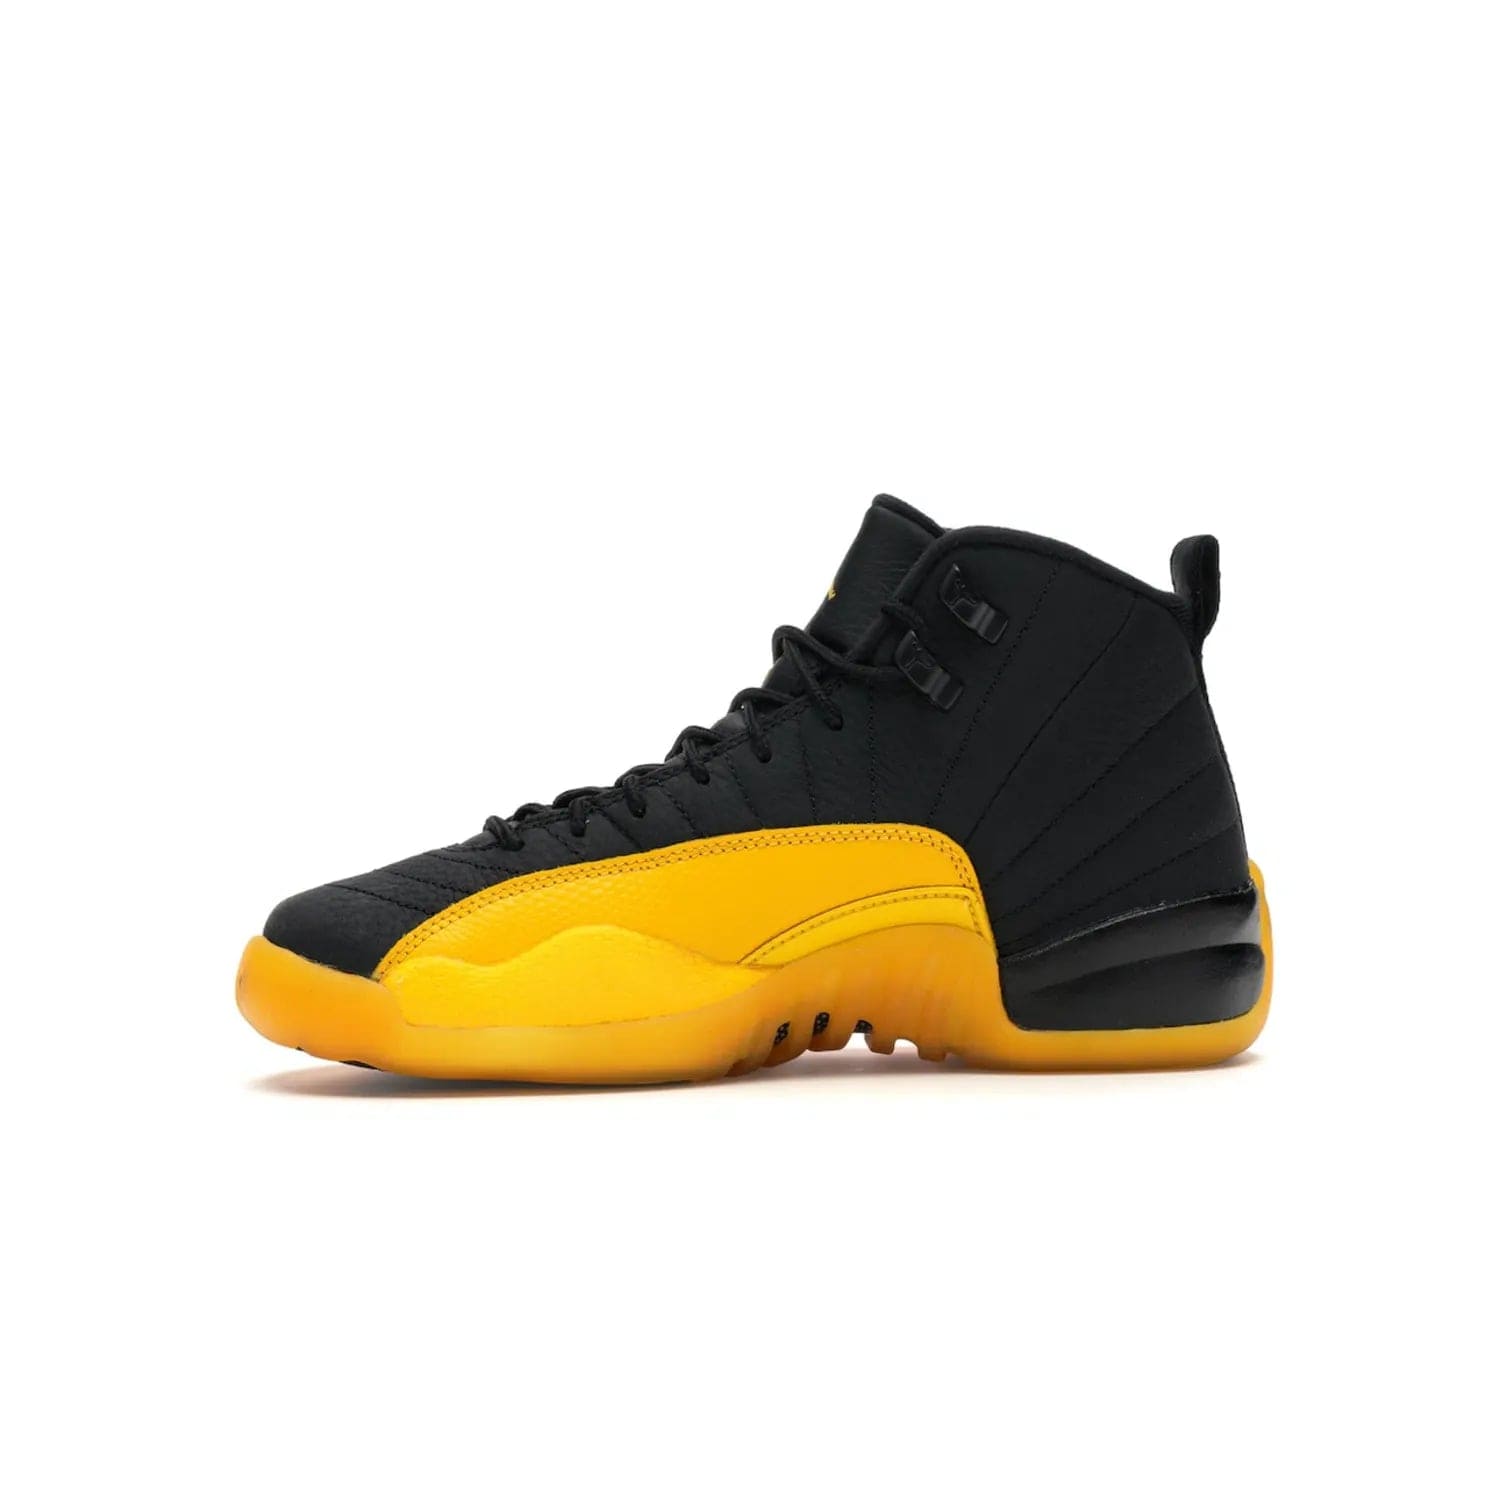 Jordan 12 Retro Black University Gold (GS) - Image 18 - Only at www.BallersClubKickz.com - Upgrade your kid's shoe collection with the Jordan 12 Retro Black University Gold. With classic style, black tumbled leather upper, and University Gold accents, it's a great summer look. Out July 2020.